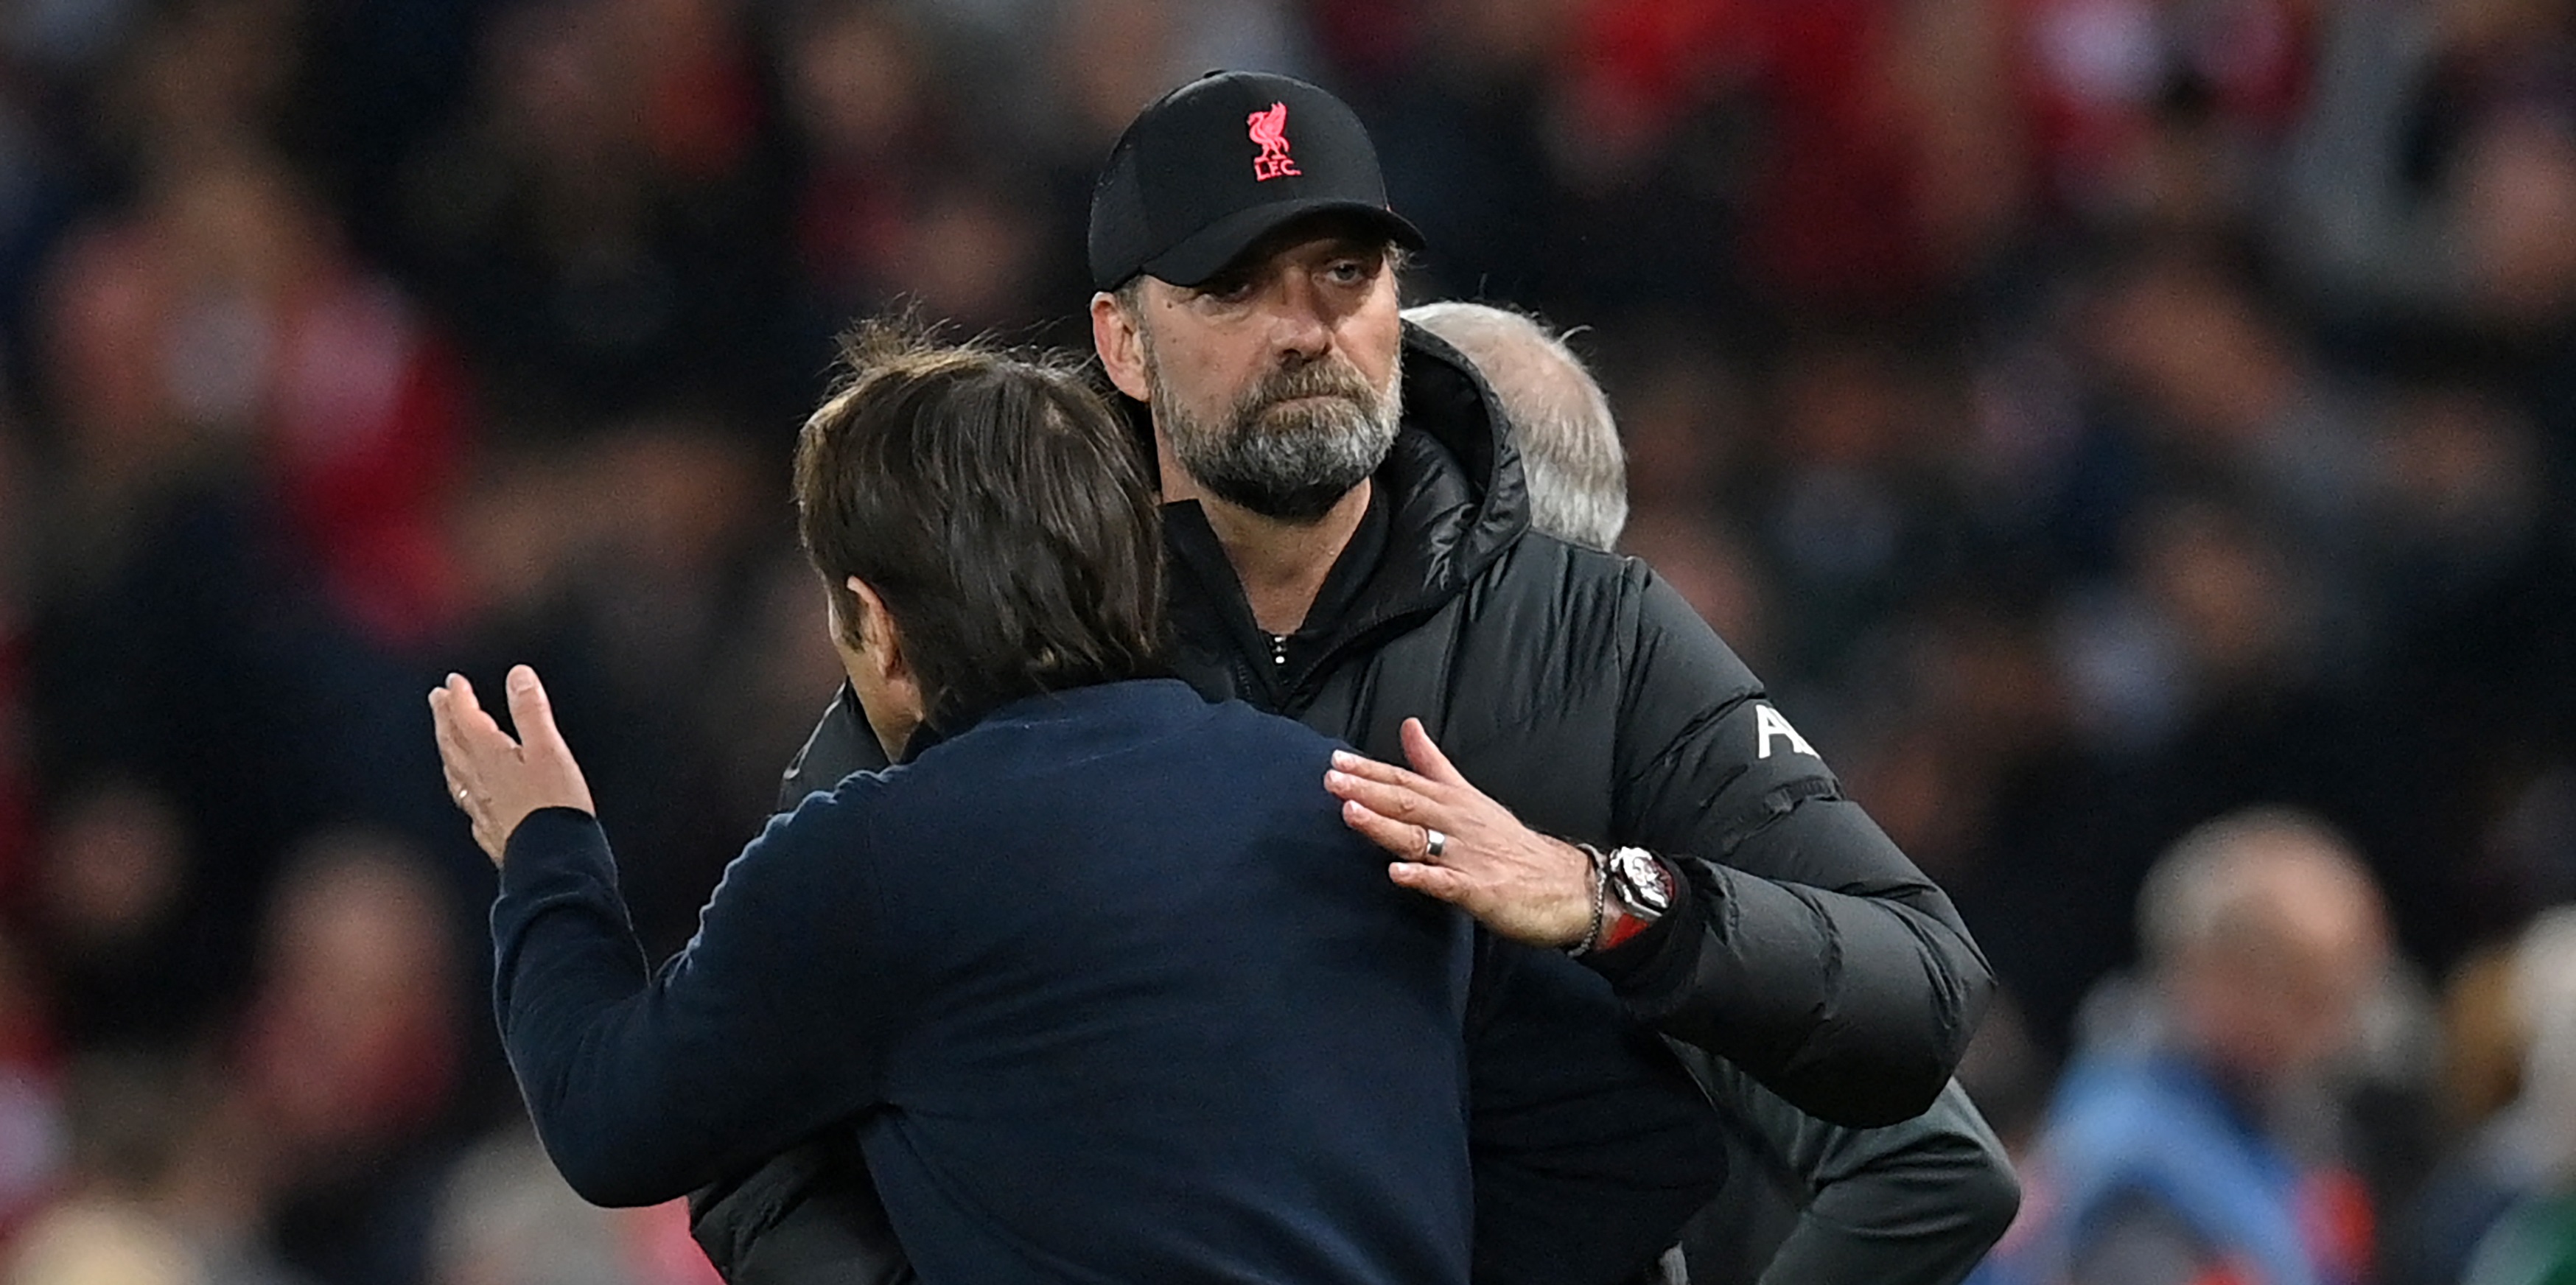 ‘I can’t’ – Klopp doesn’t hold back in scathing review of ‘world class’ Tottenham; compares Conte’s men to La Liga outfit